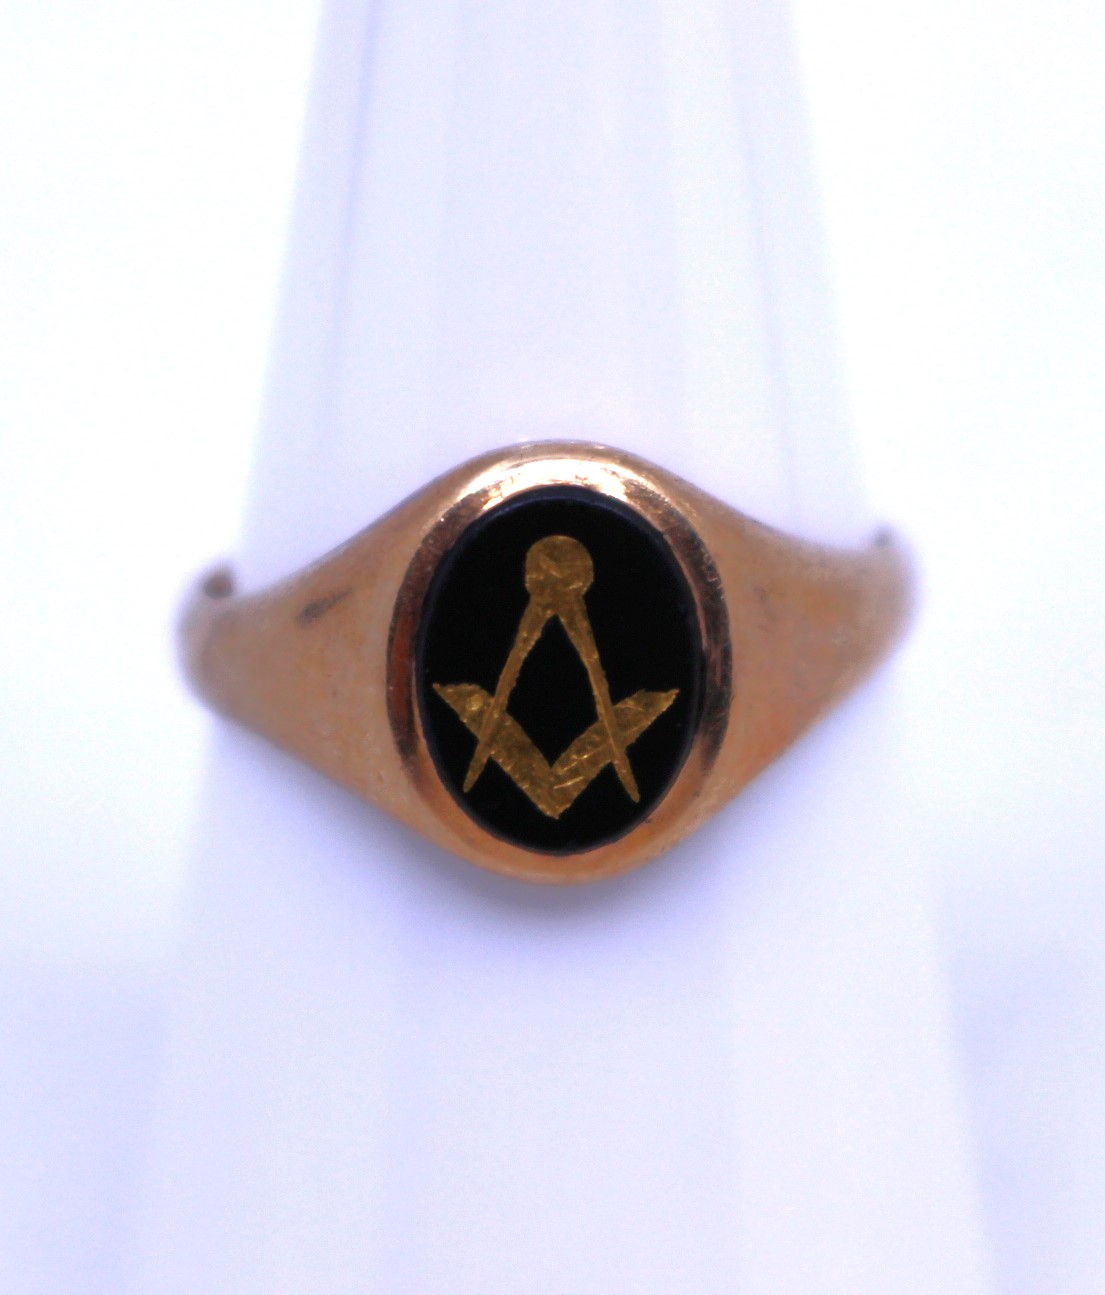 9ct Gold Masonic Black Hardstone Ring. The ring is hallmarked "9" and "375" for 9ct Gold. The ring